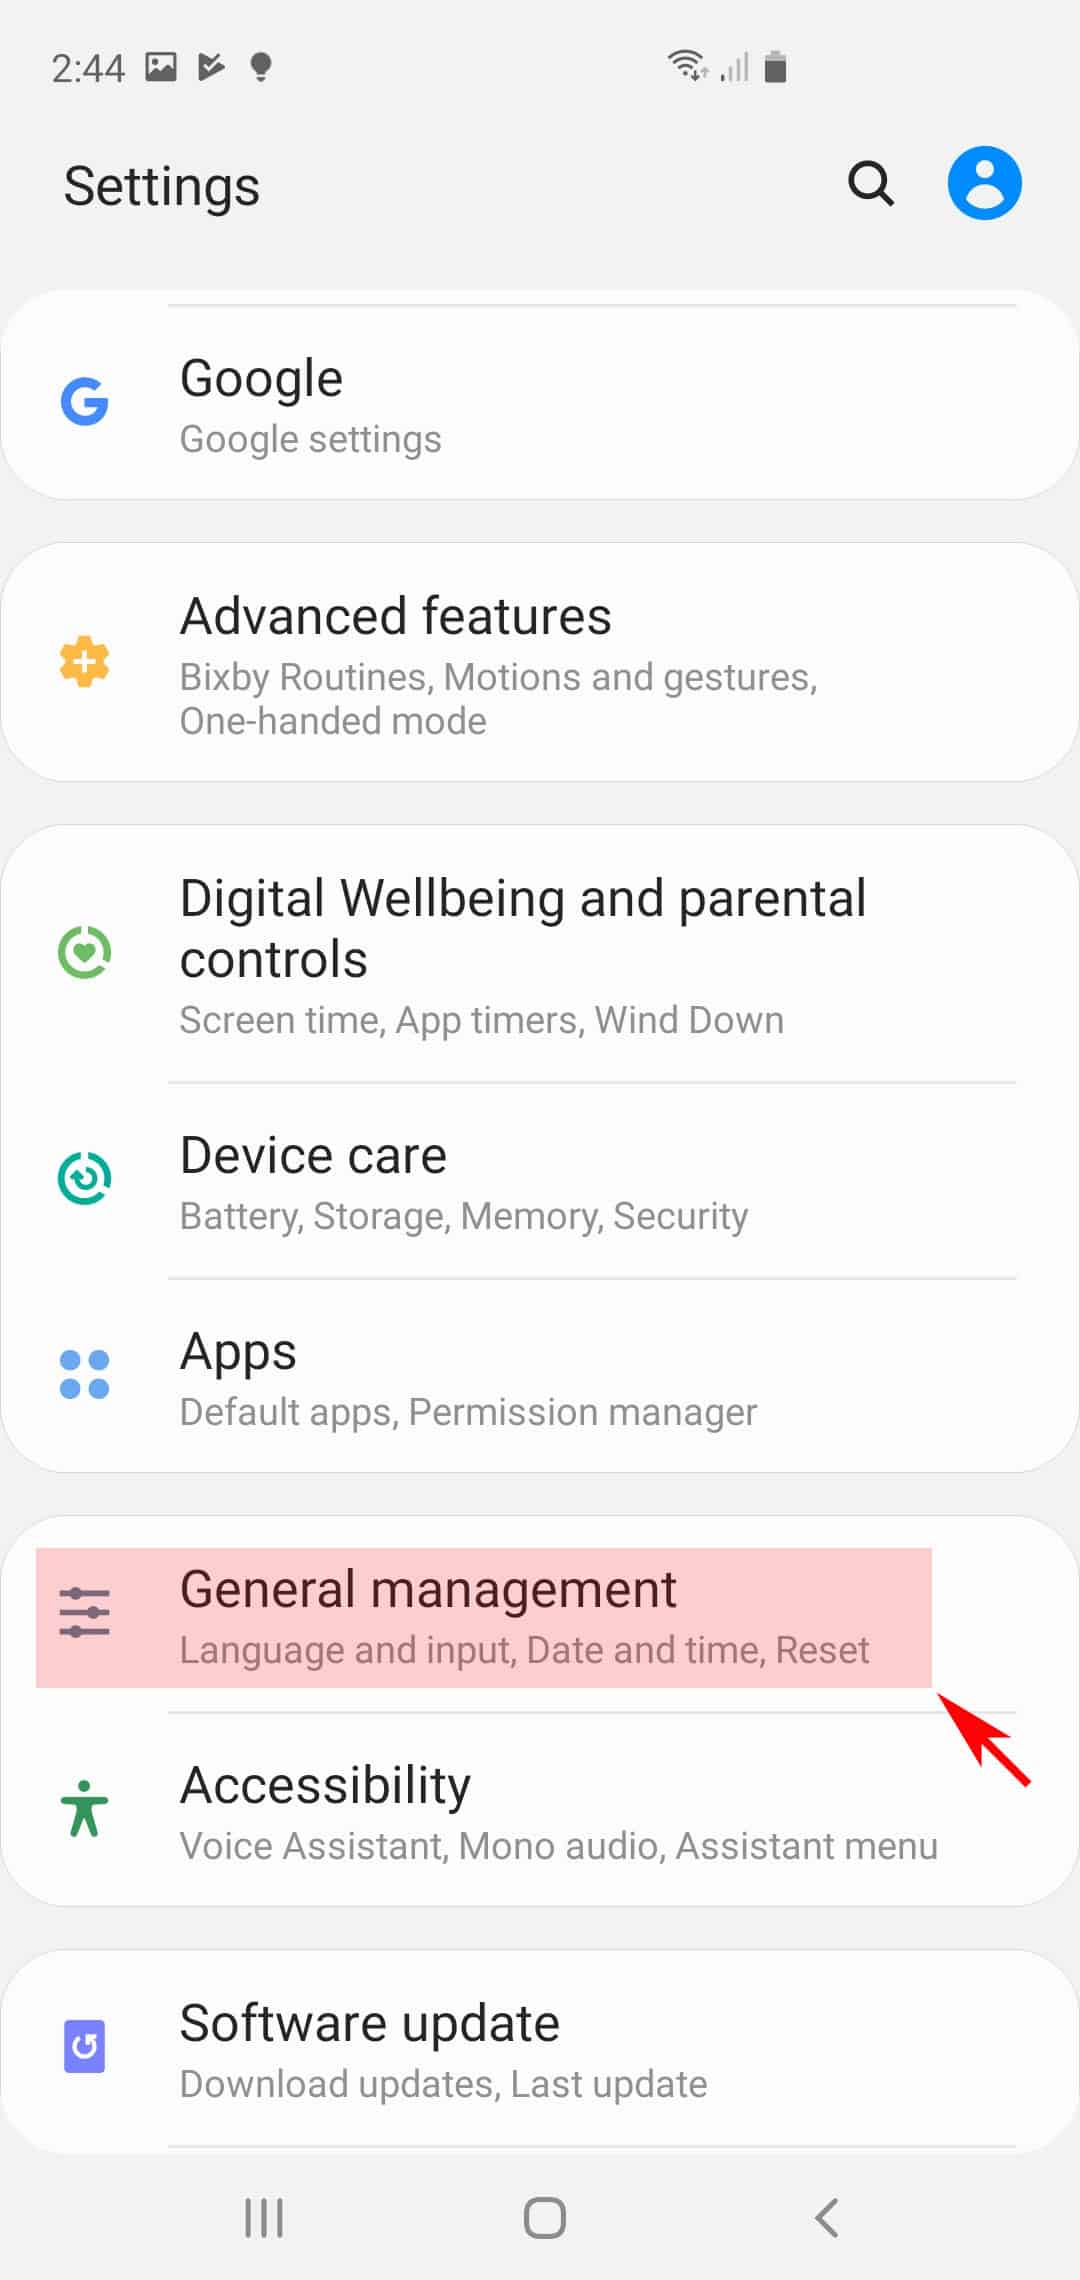 galaxy s20 reset network settings - general management